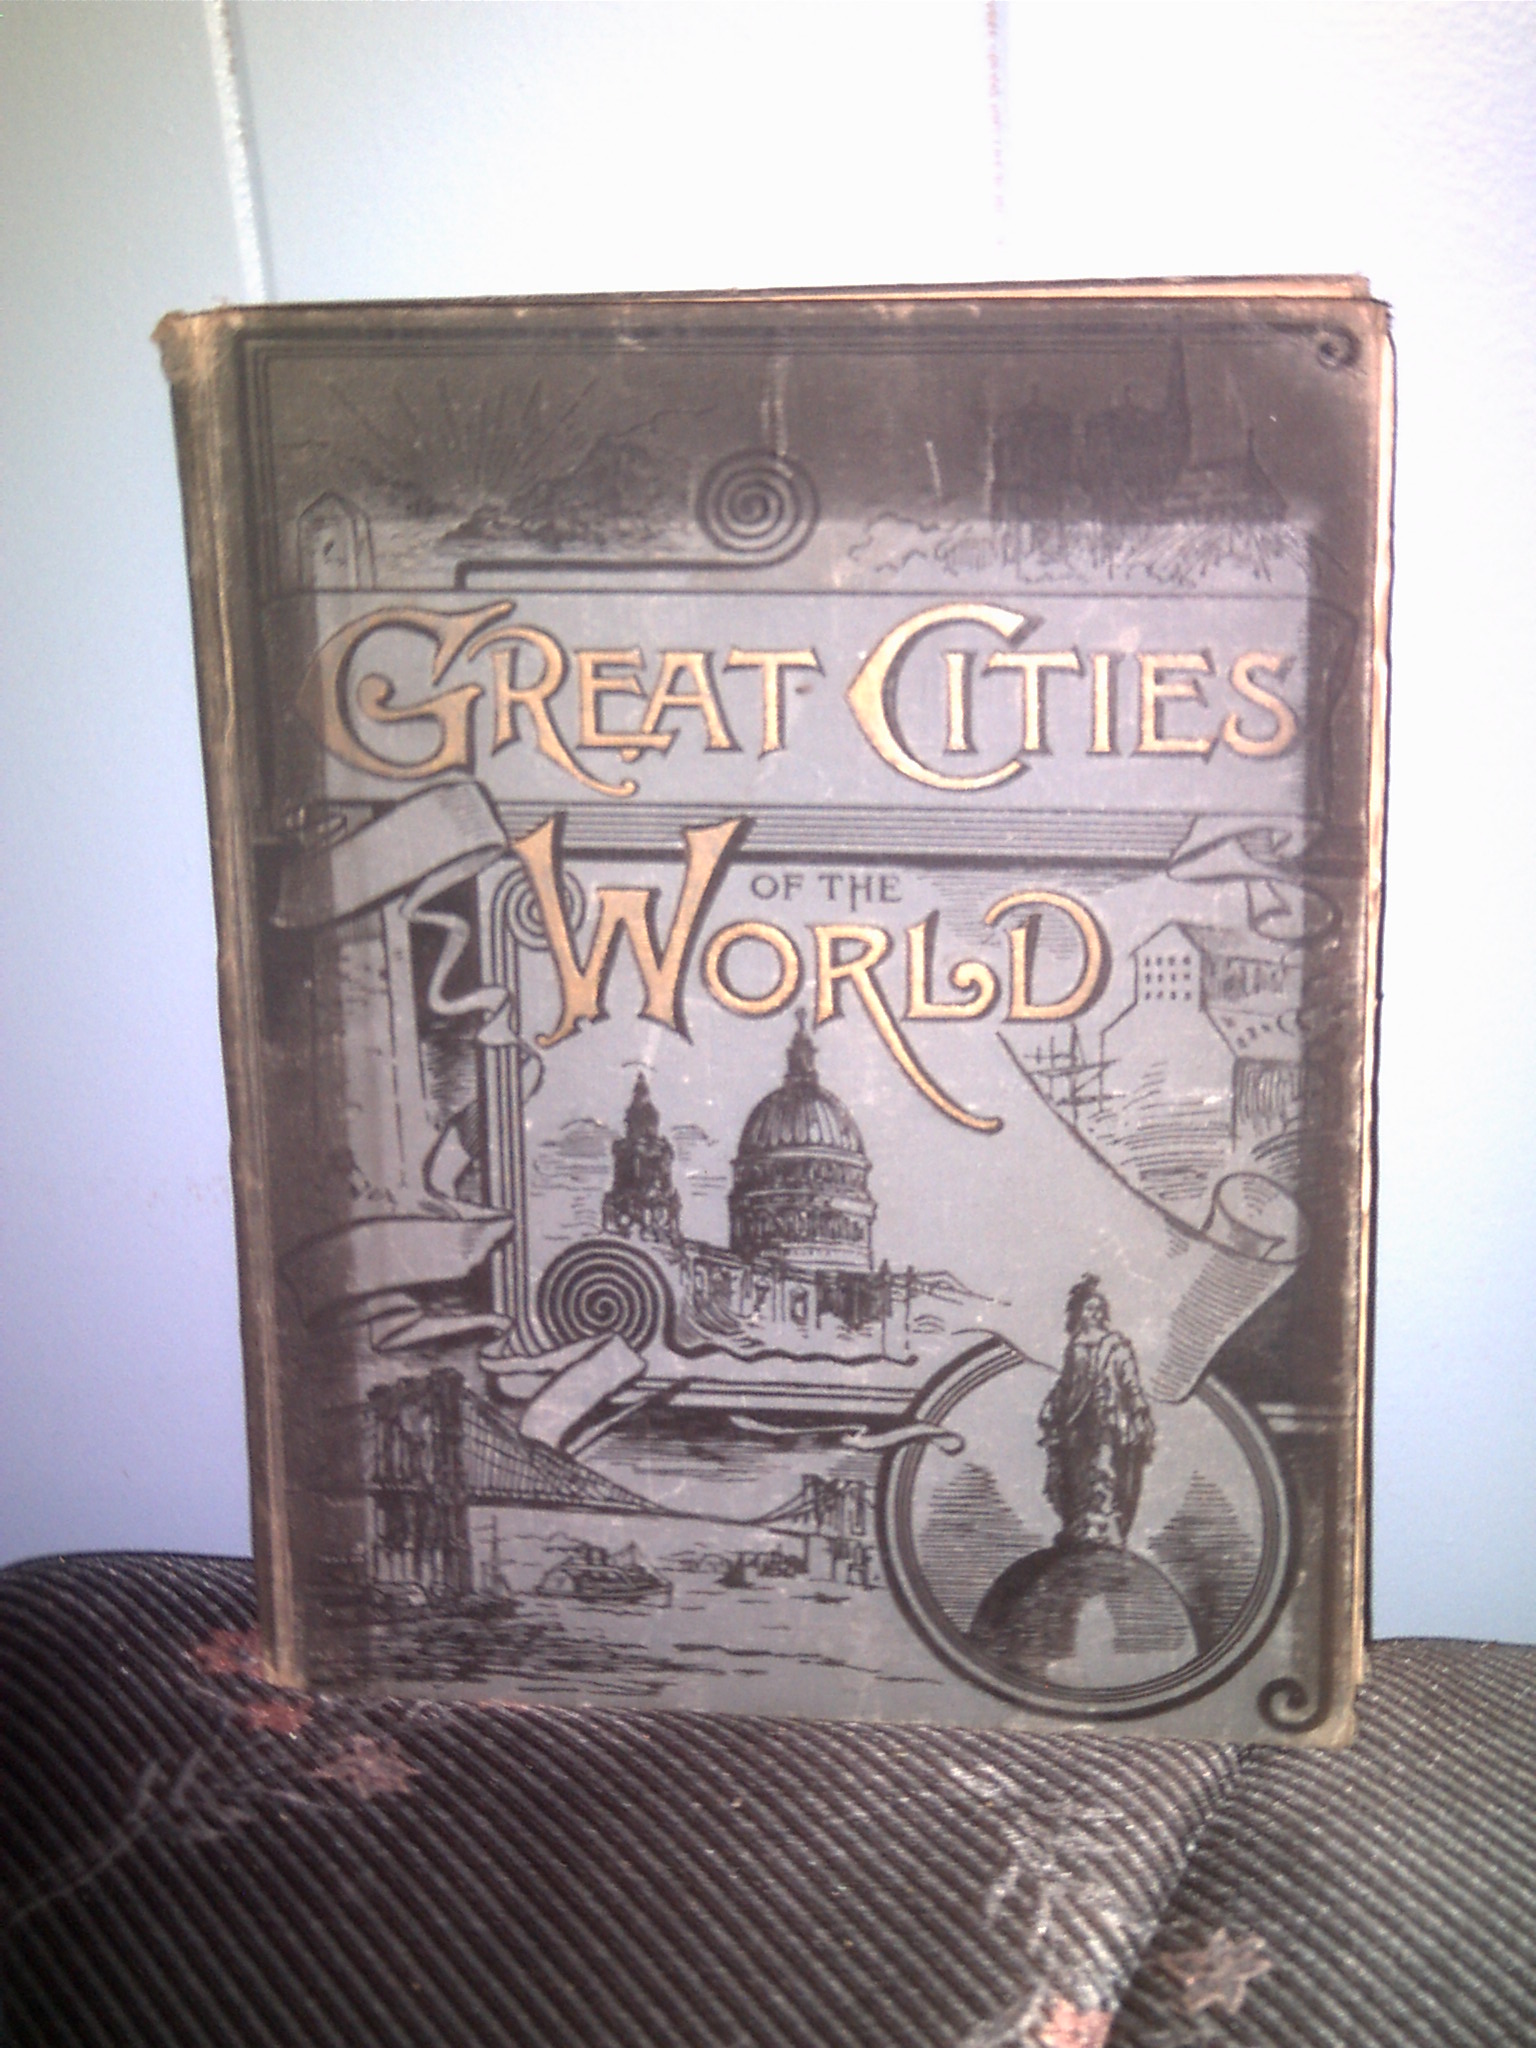 vintage book from 1895 - 1911